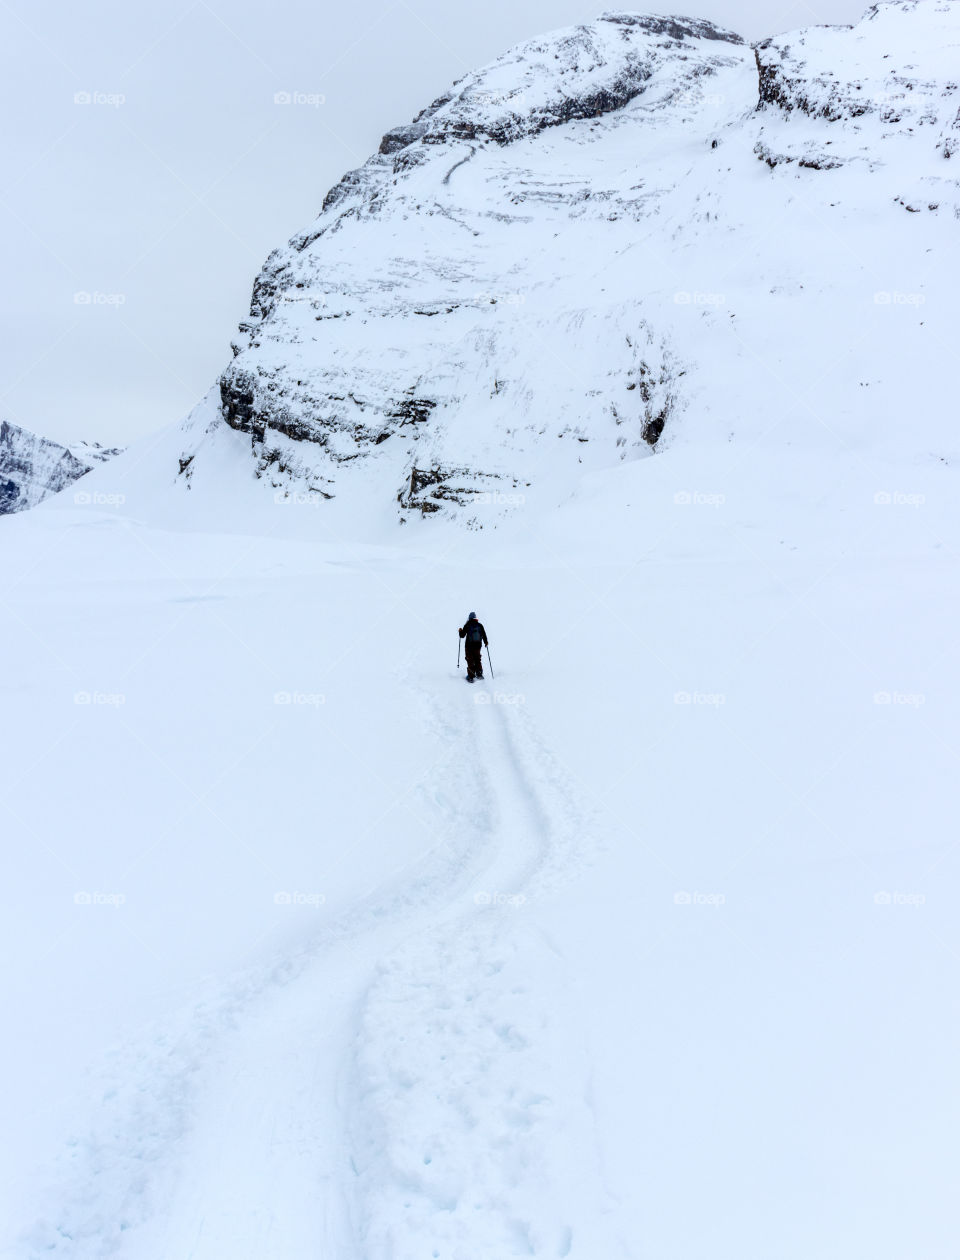 Hiking with snow shoes through powdery white winter landscape.